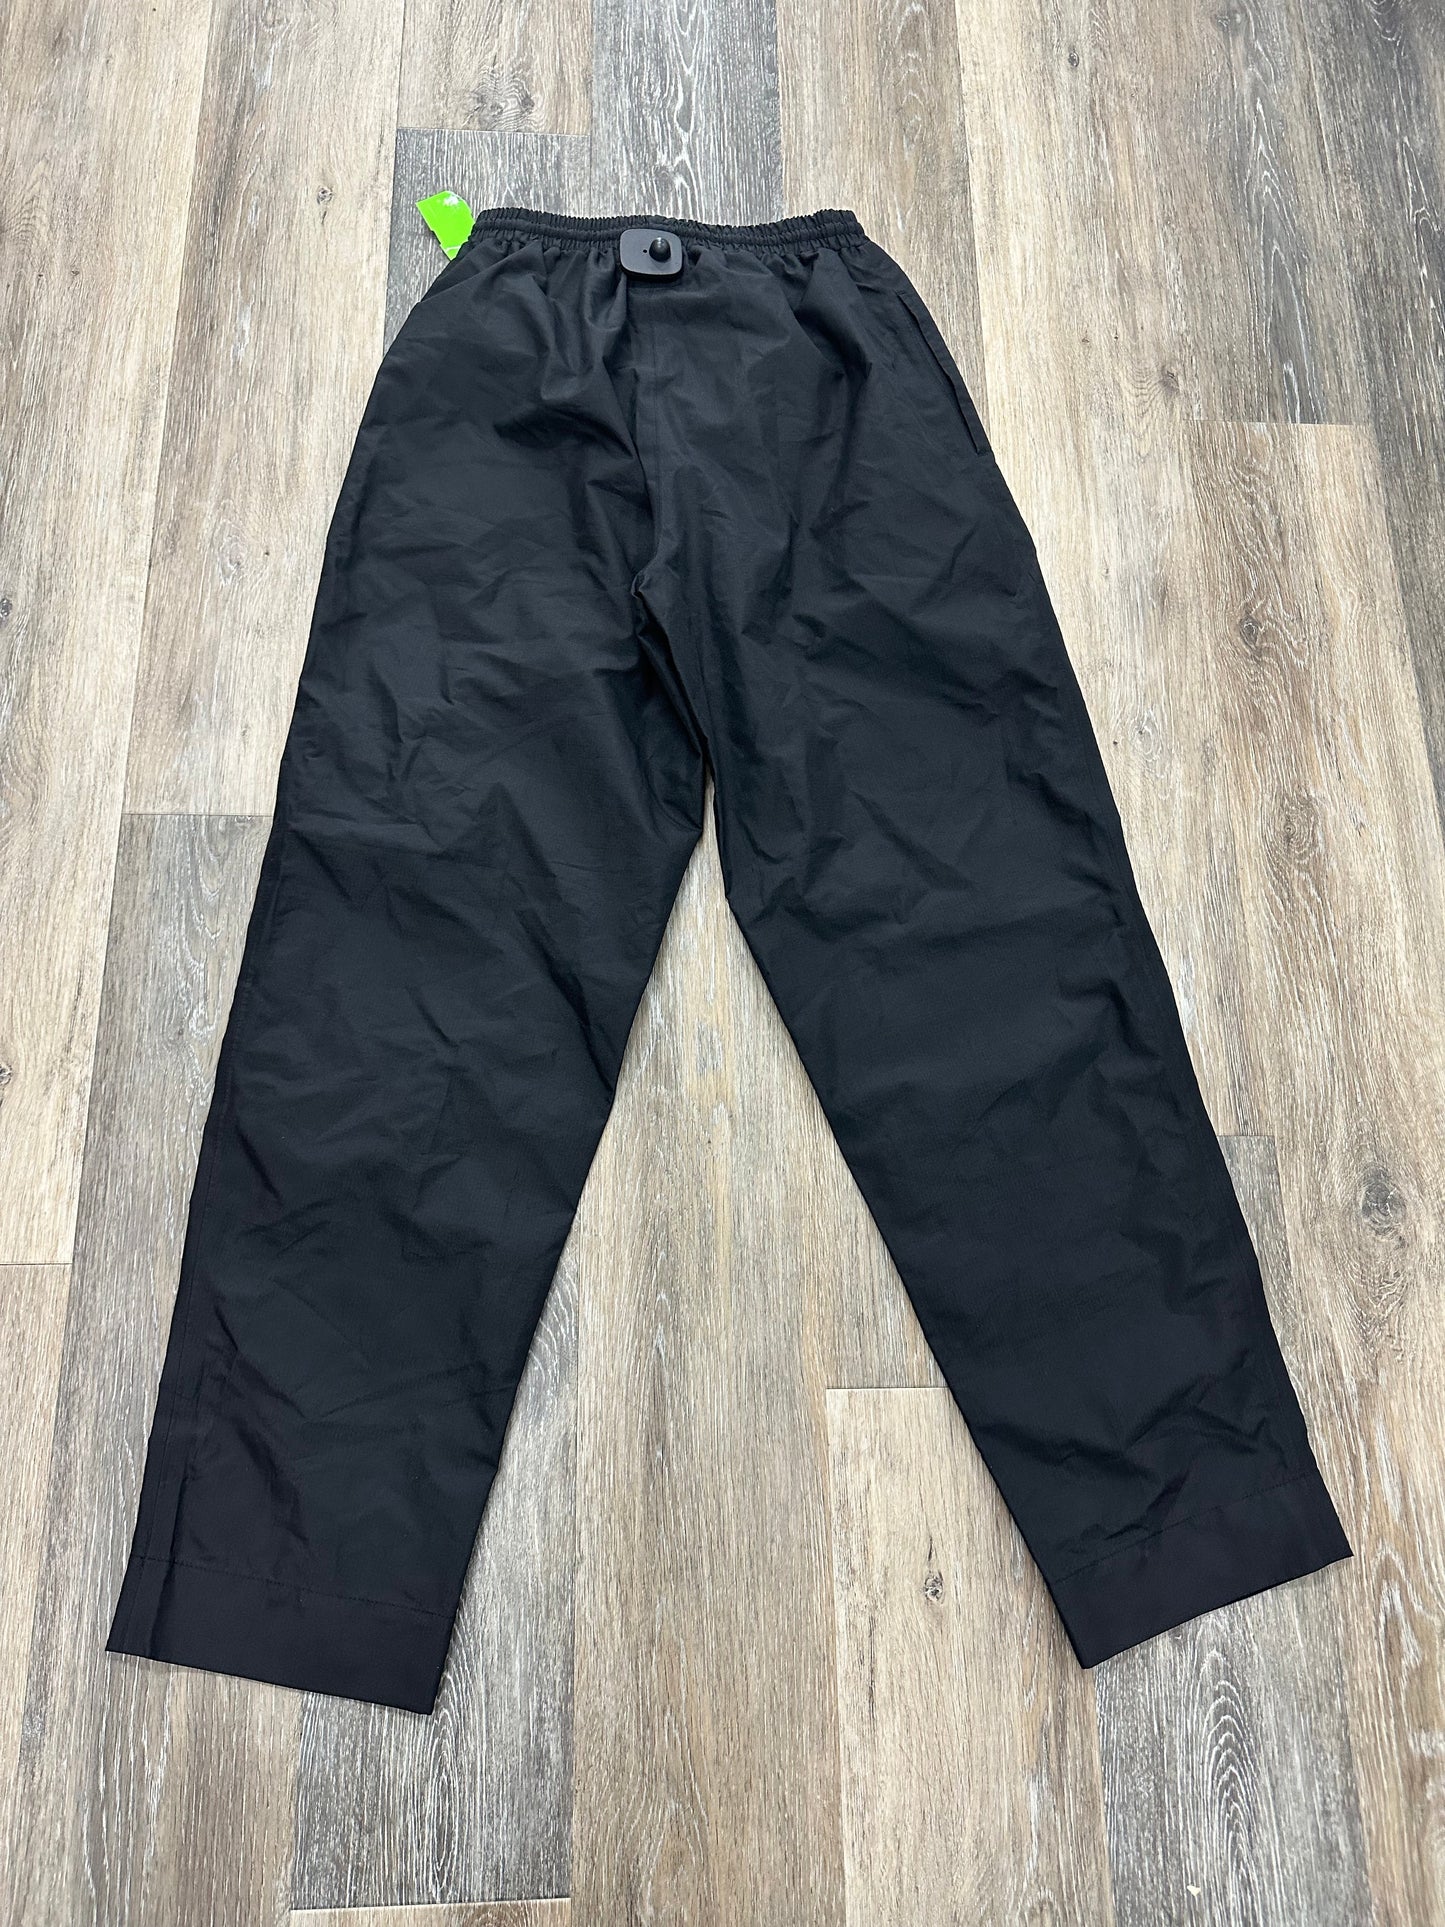 Athletic Pants By Sun Mountain   Size: S